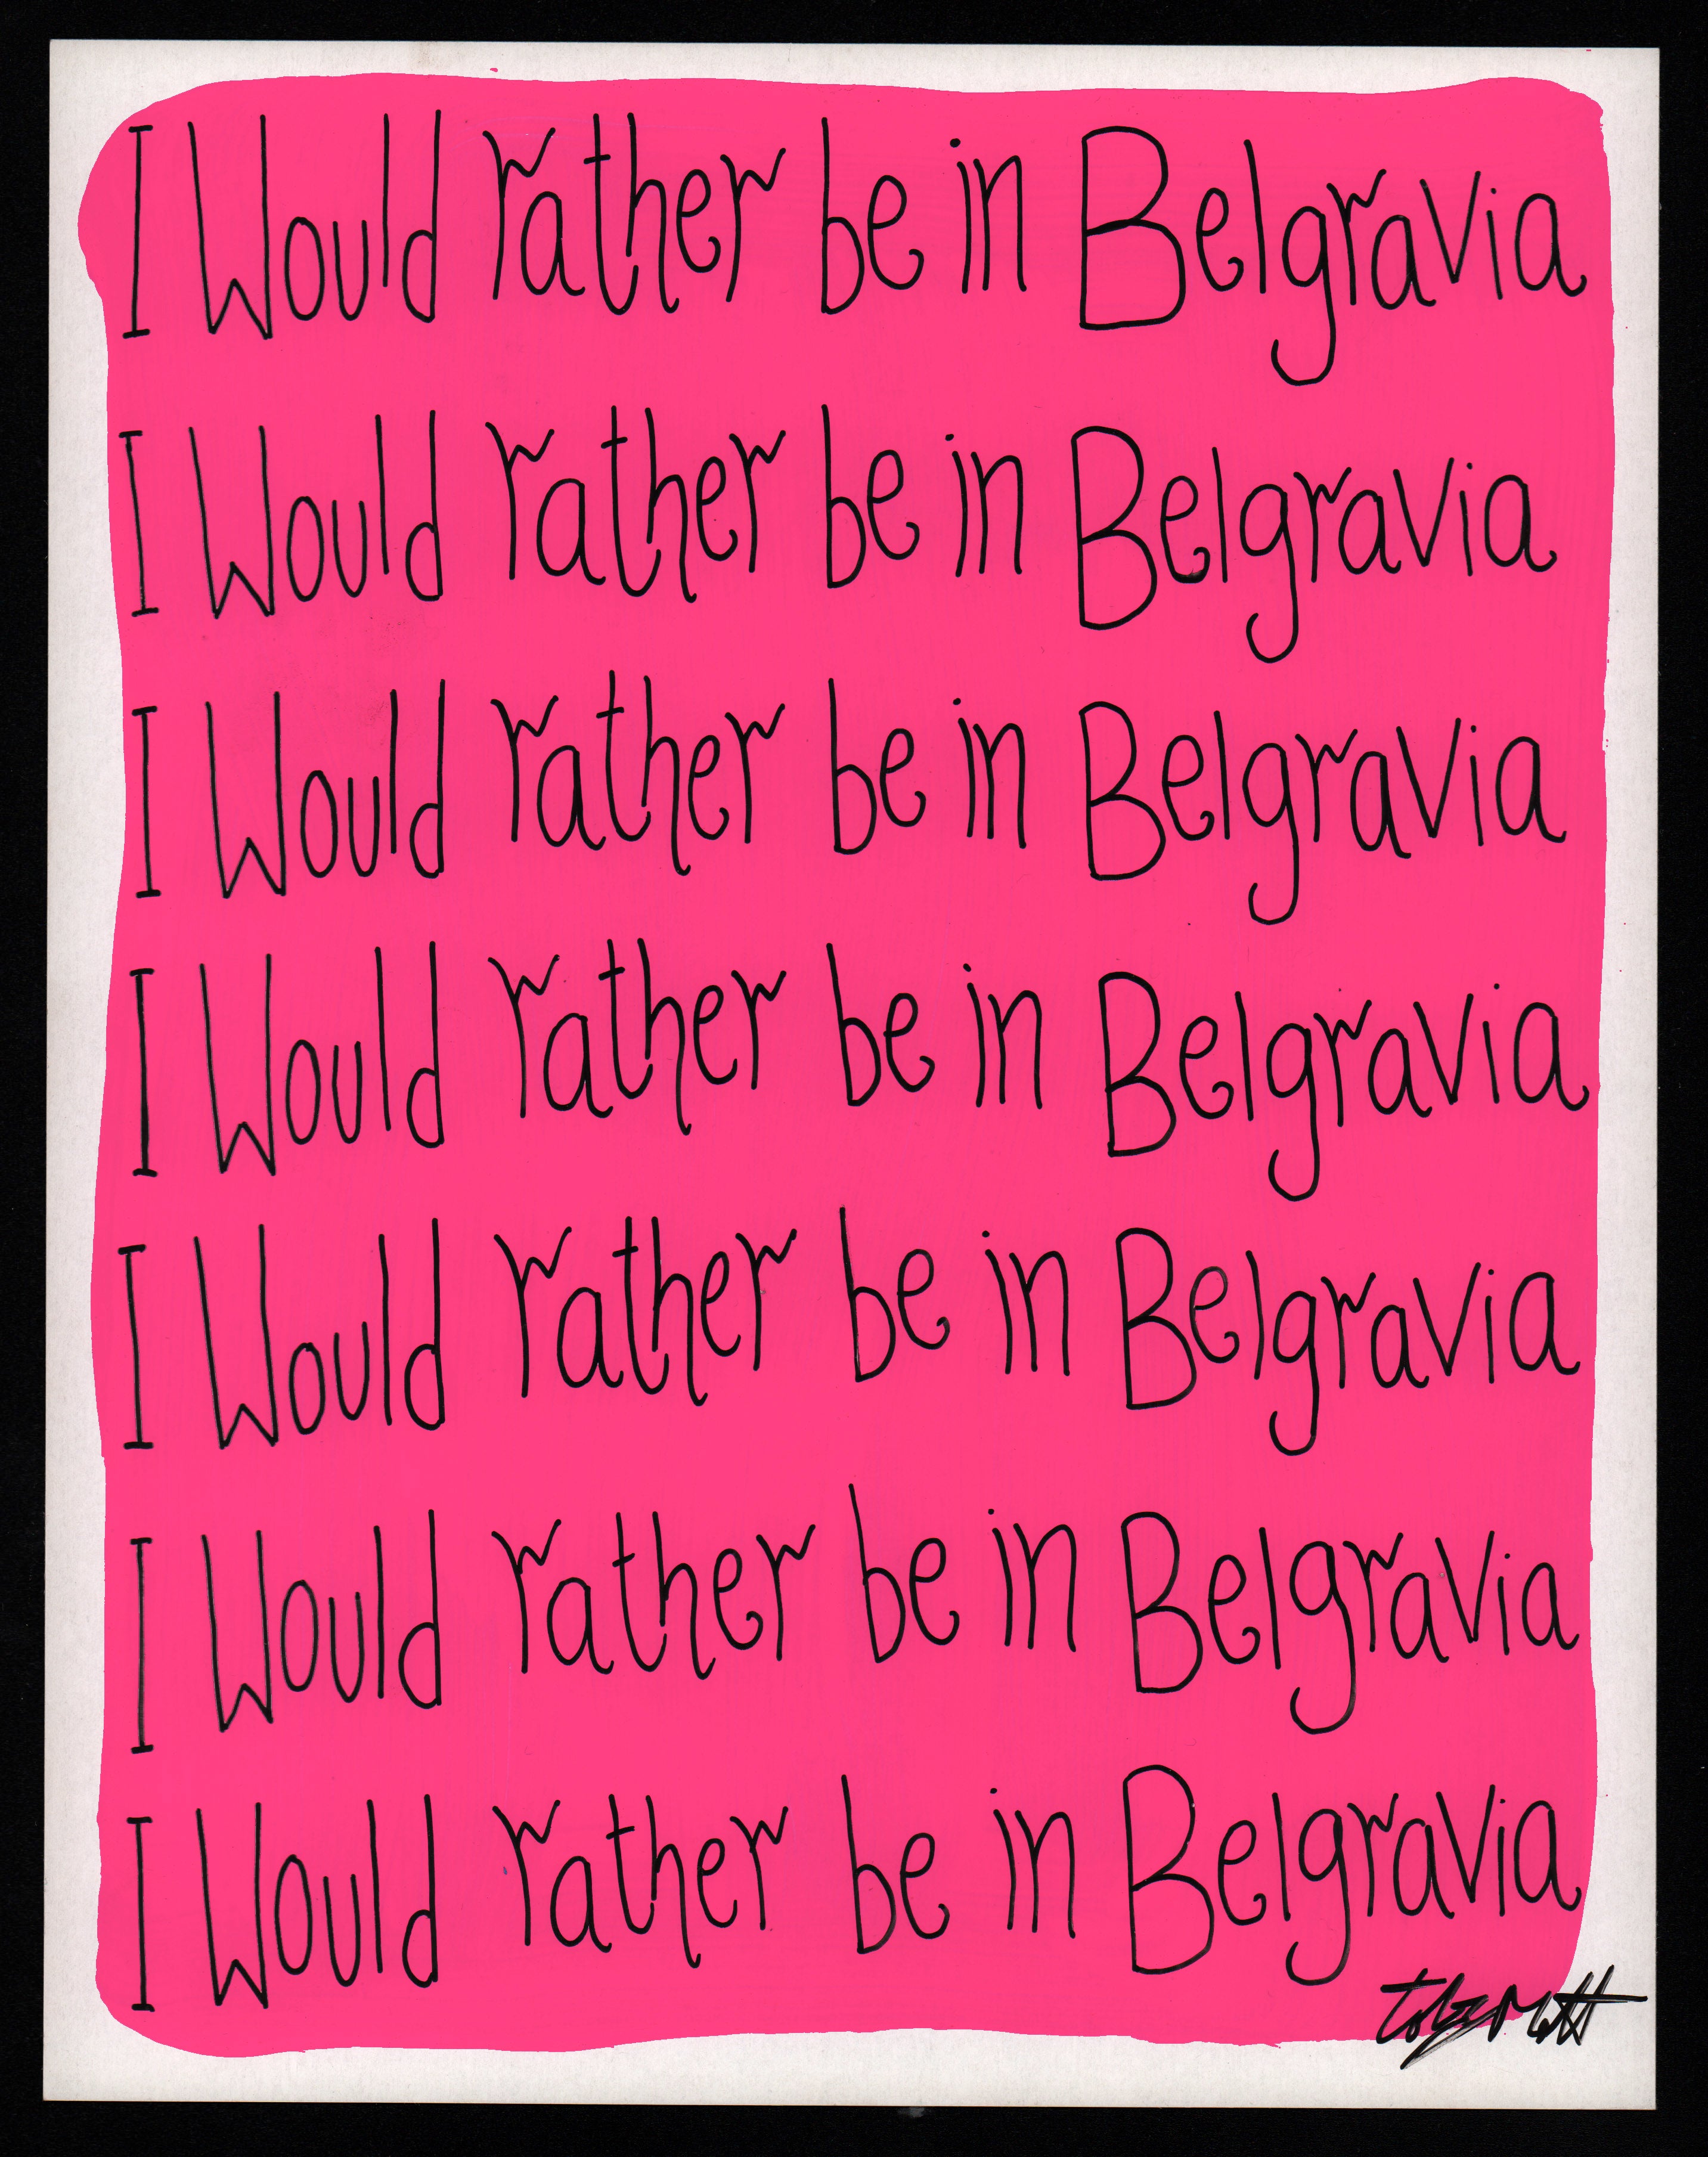 I'd rather be in Belgravia